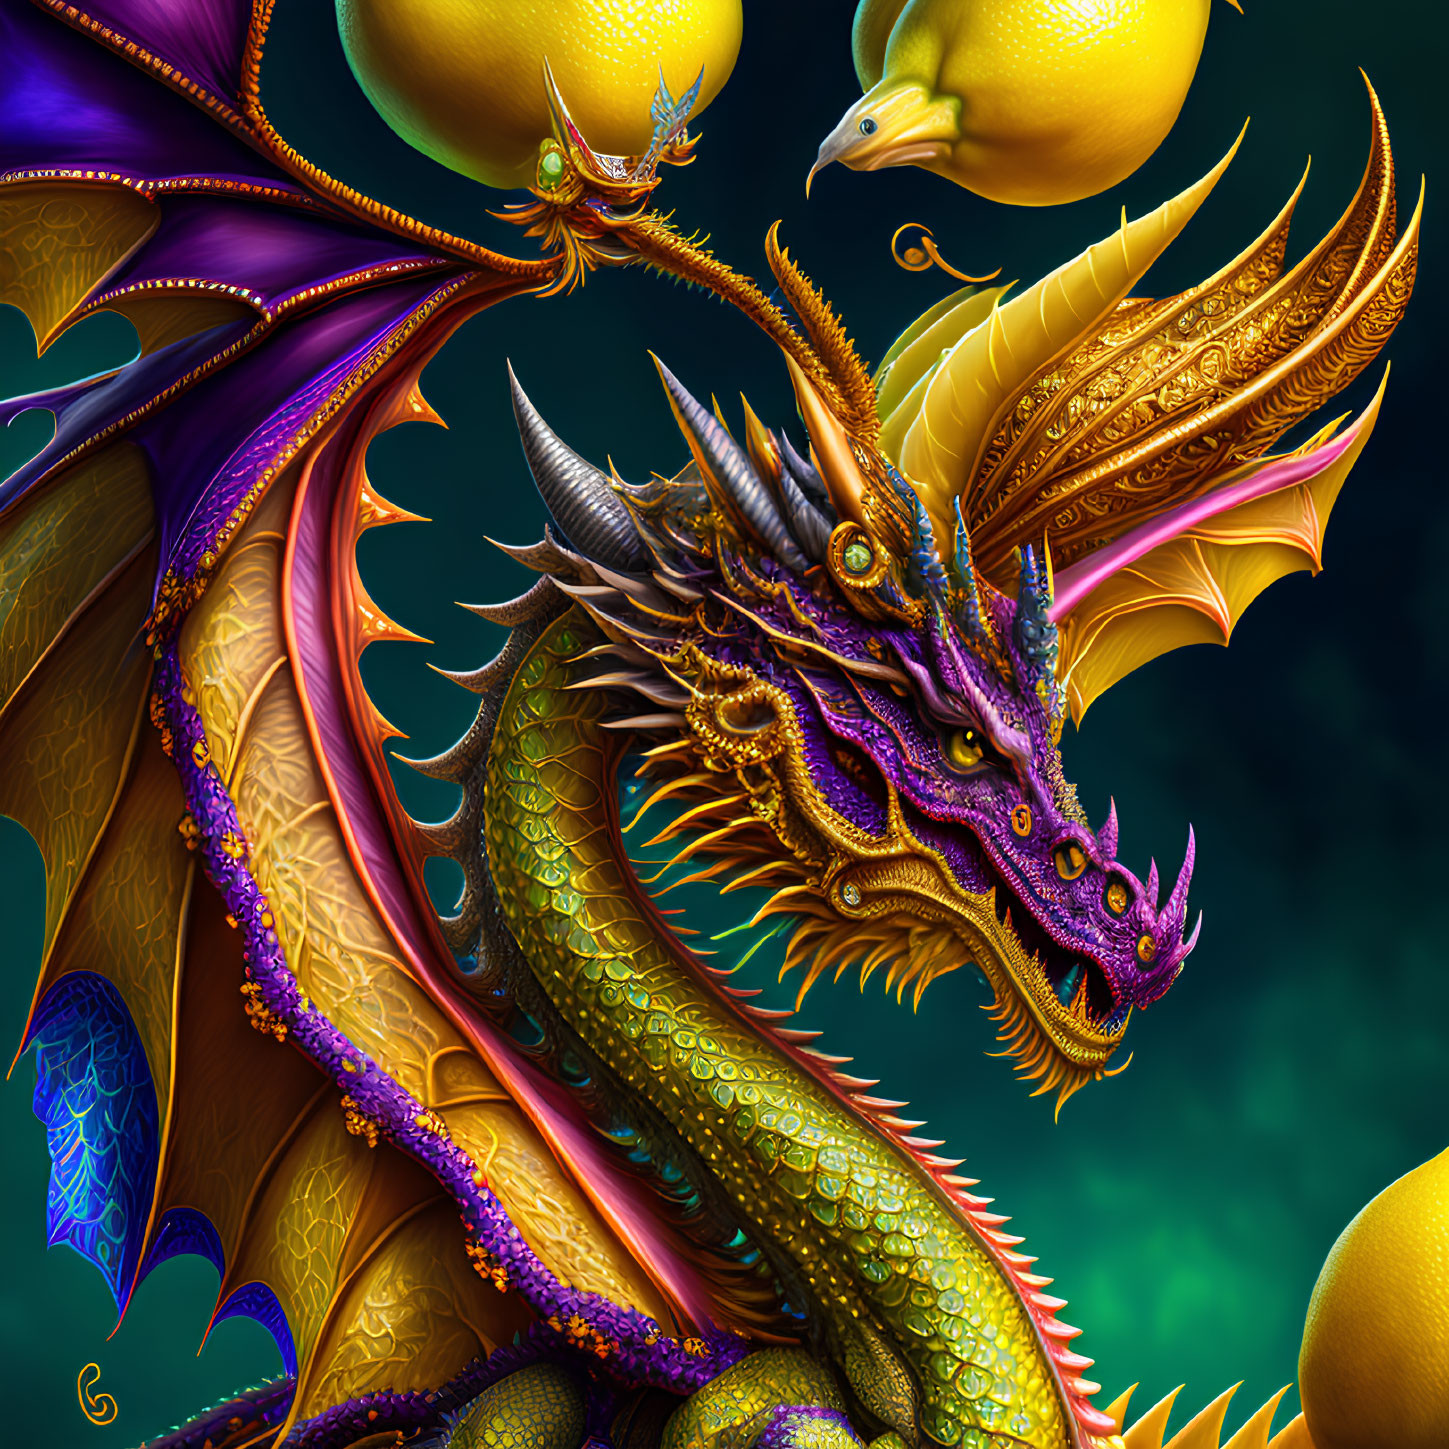 Detailed golden dragon with purple accents and smaller dragons in vibrant digital art.